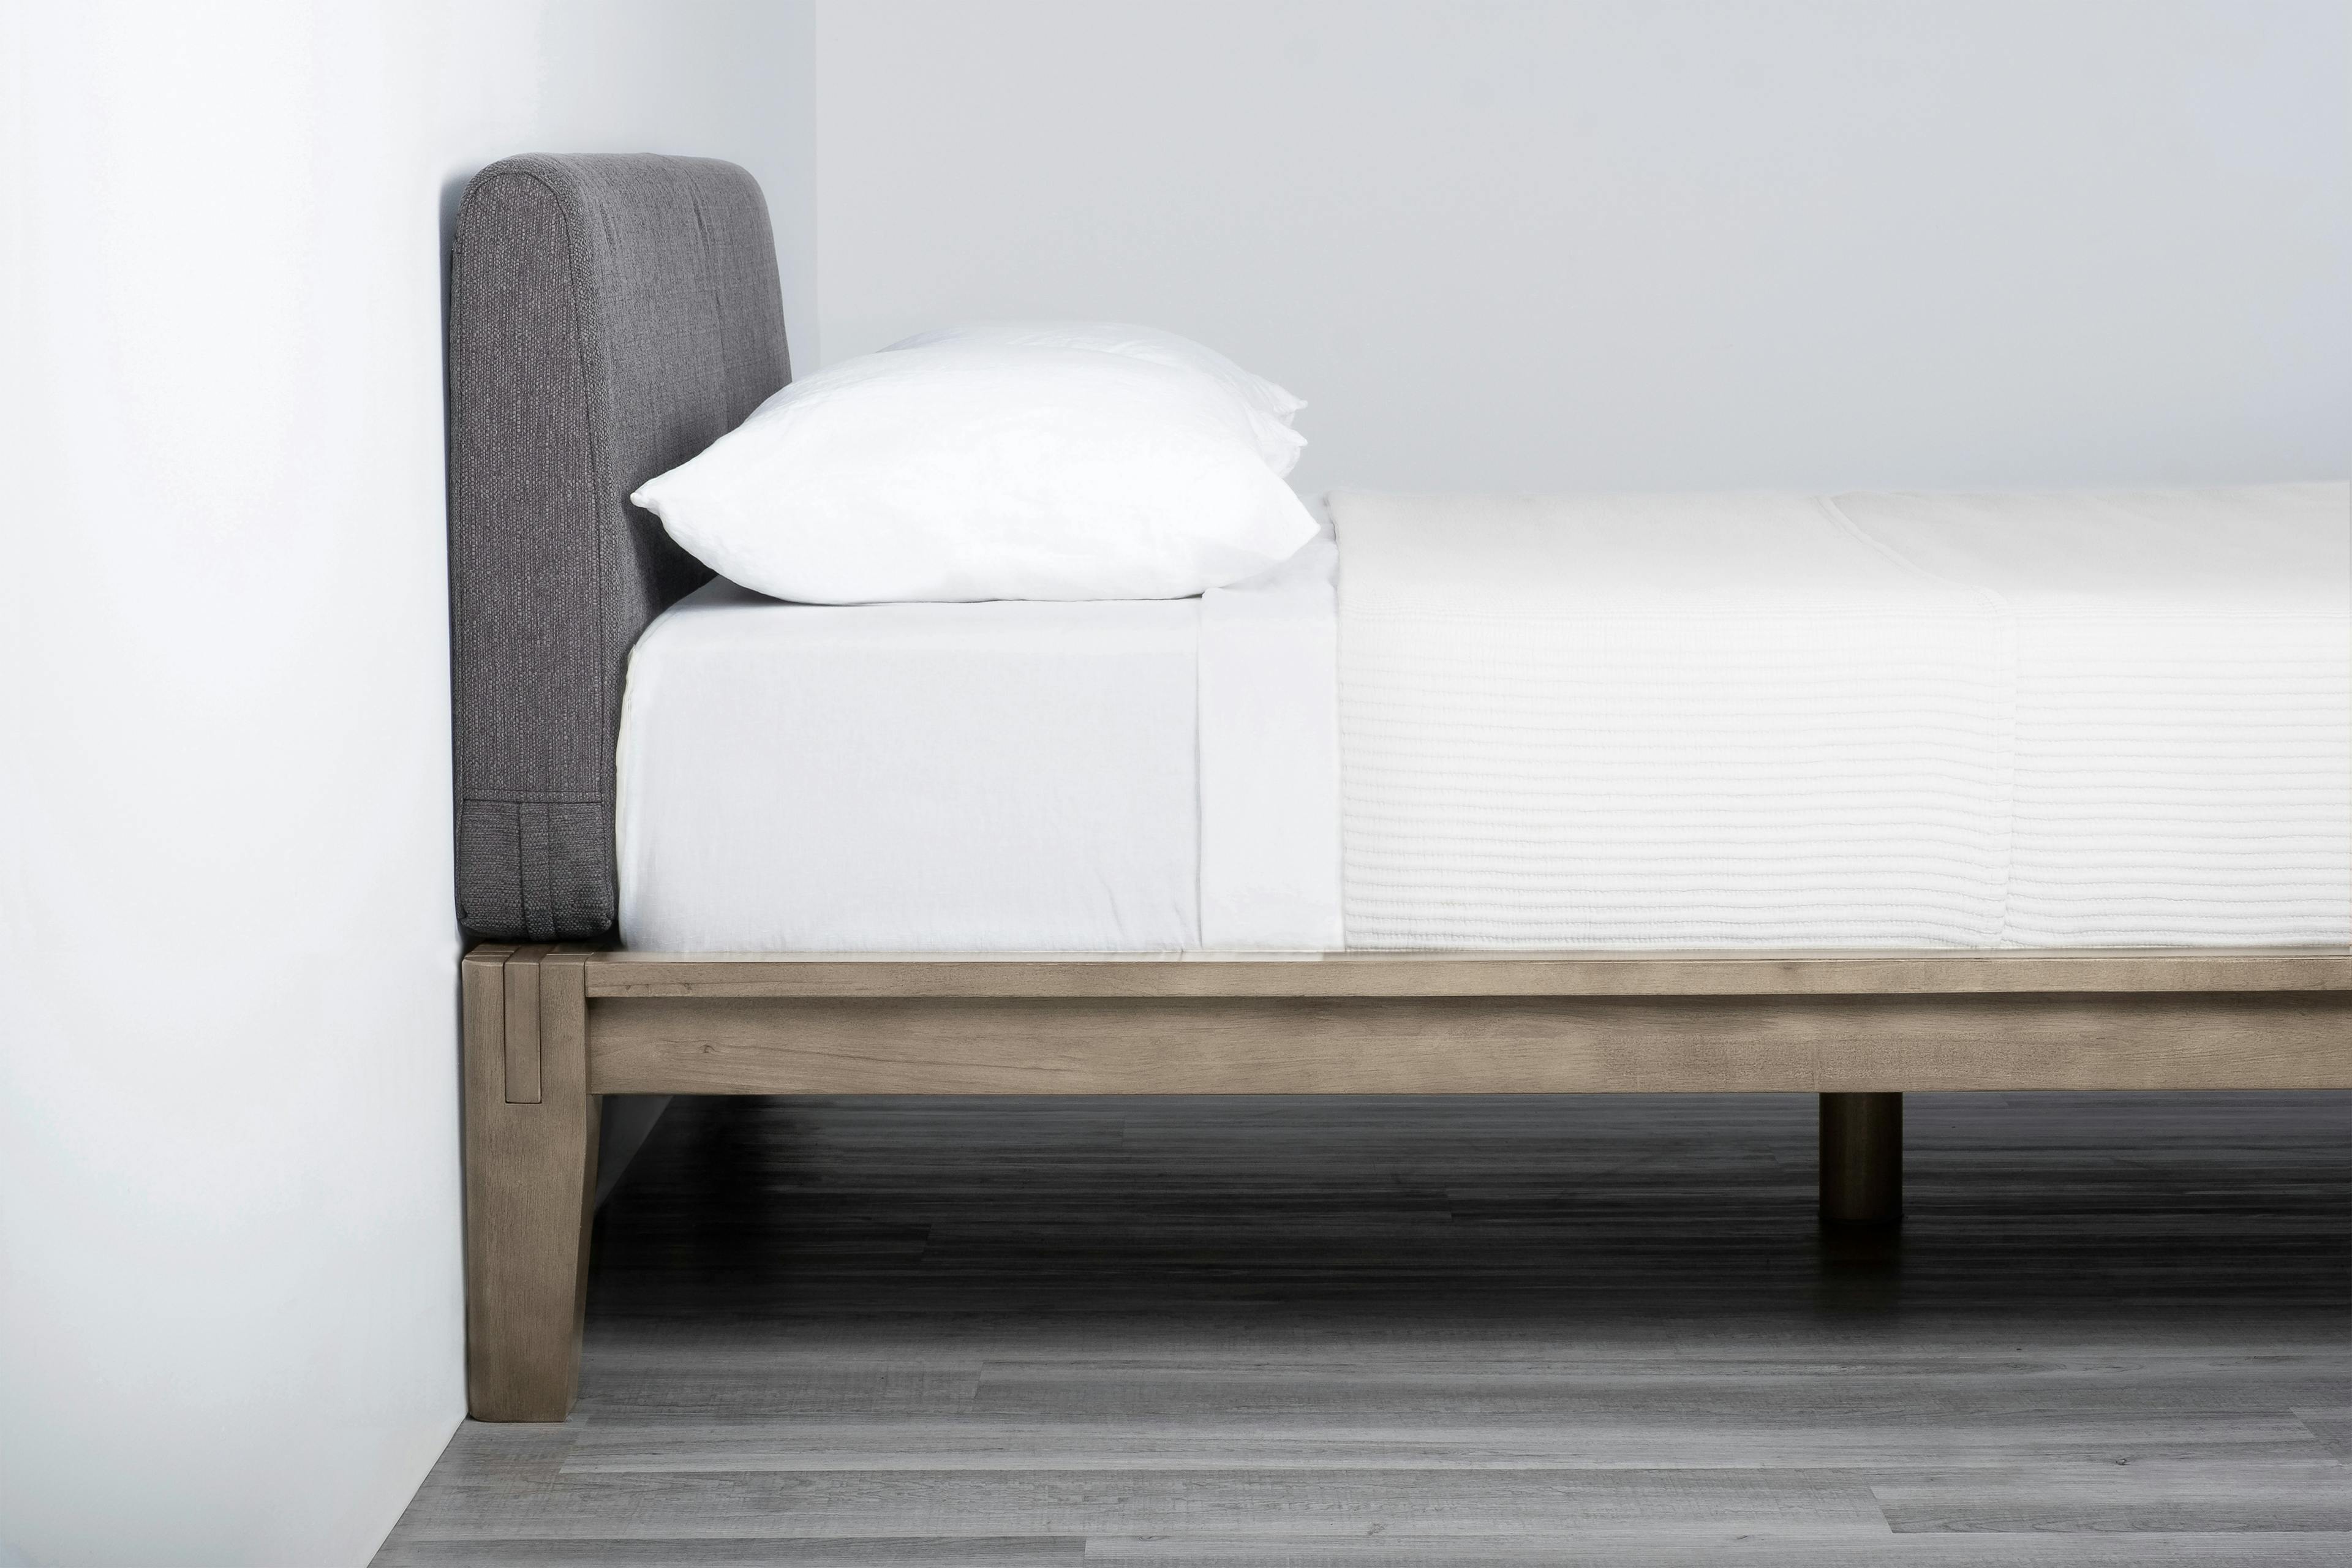 The Bed (Grey / Dark Charcoal) - Side - 3:2